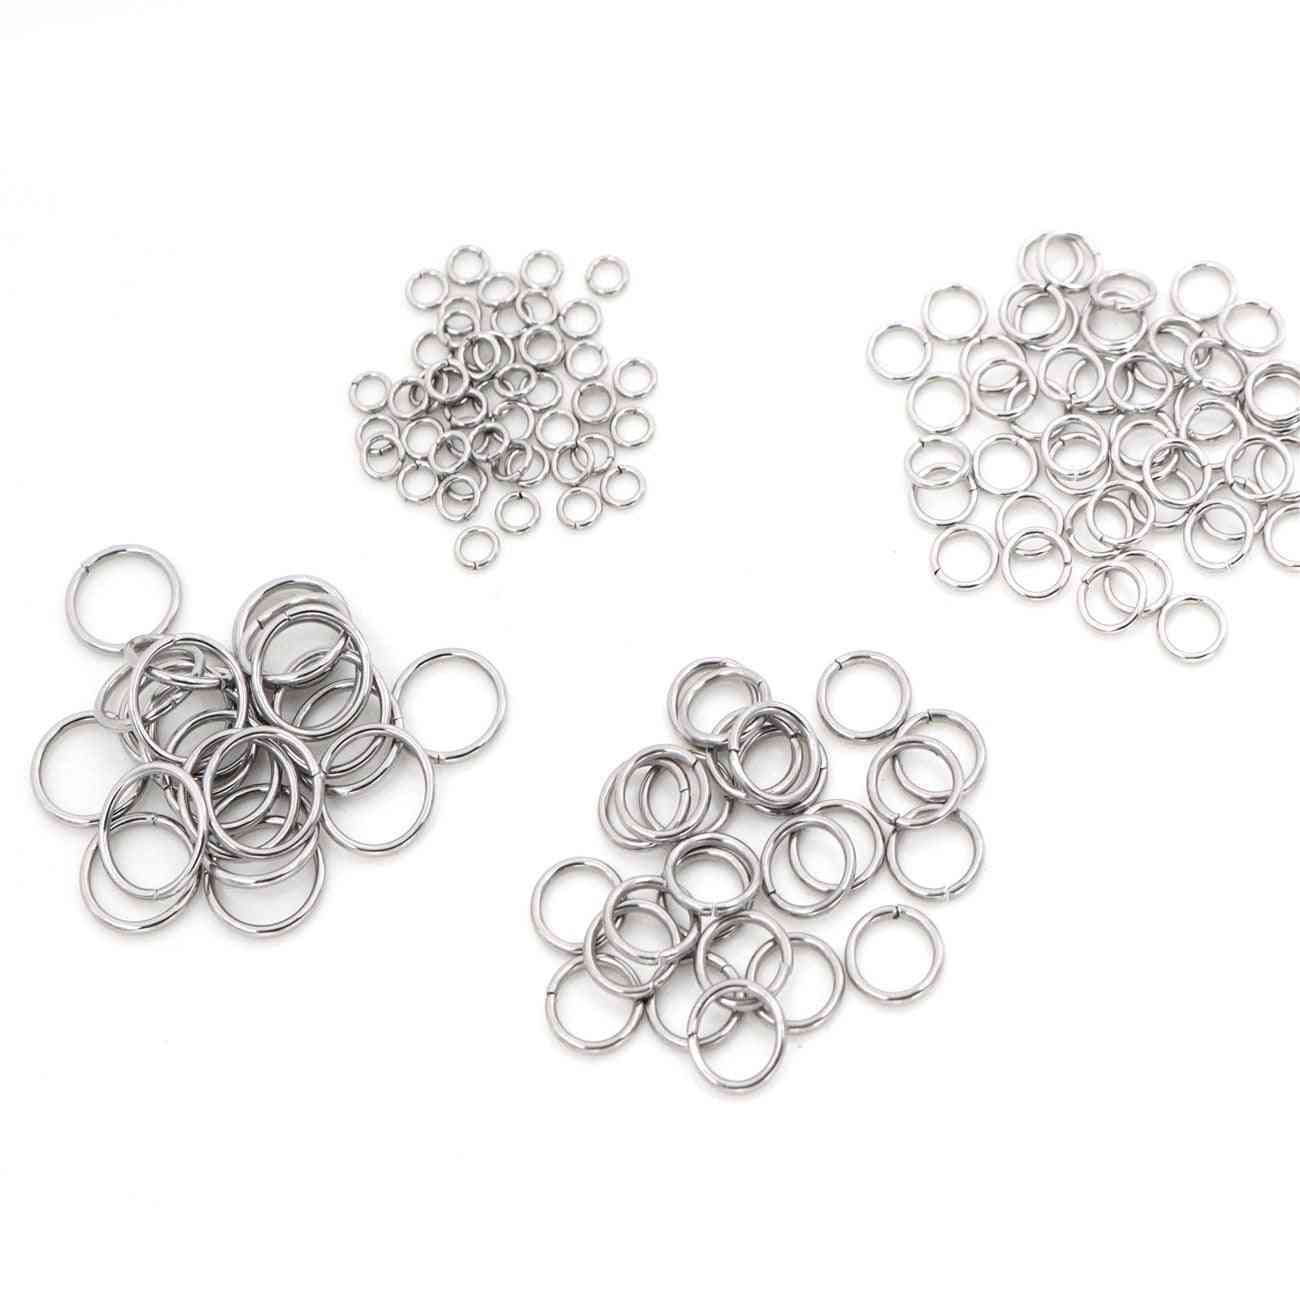 200pcs Stainless Steel Diy Jewelry Findings